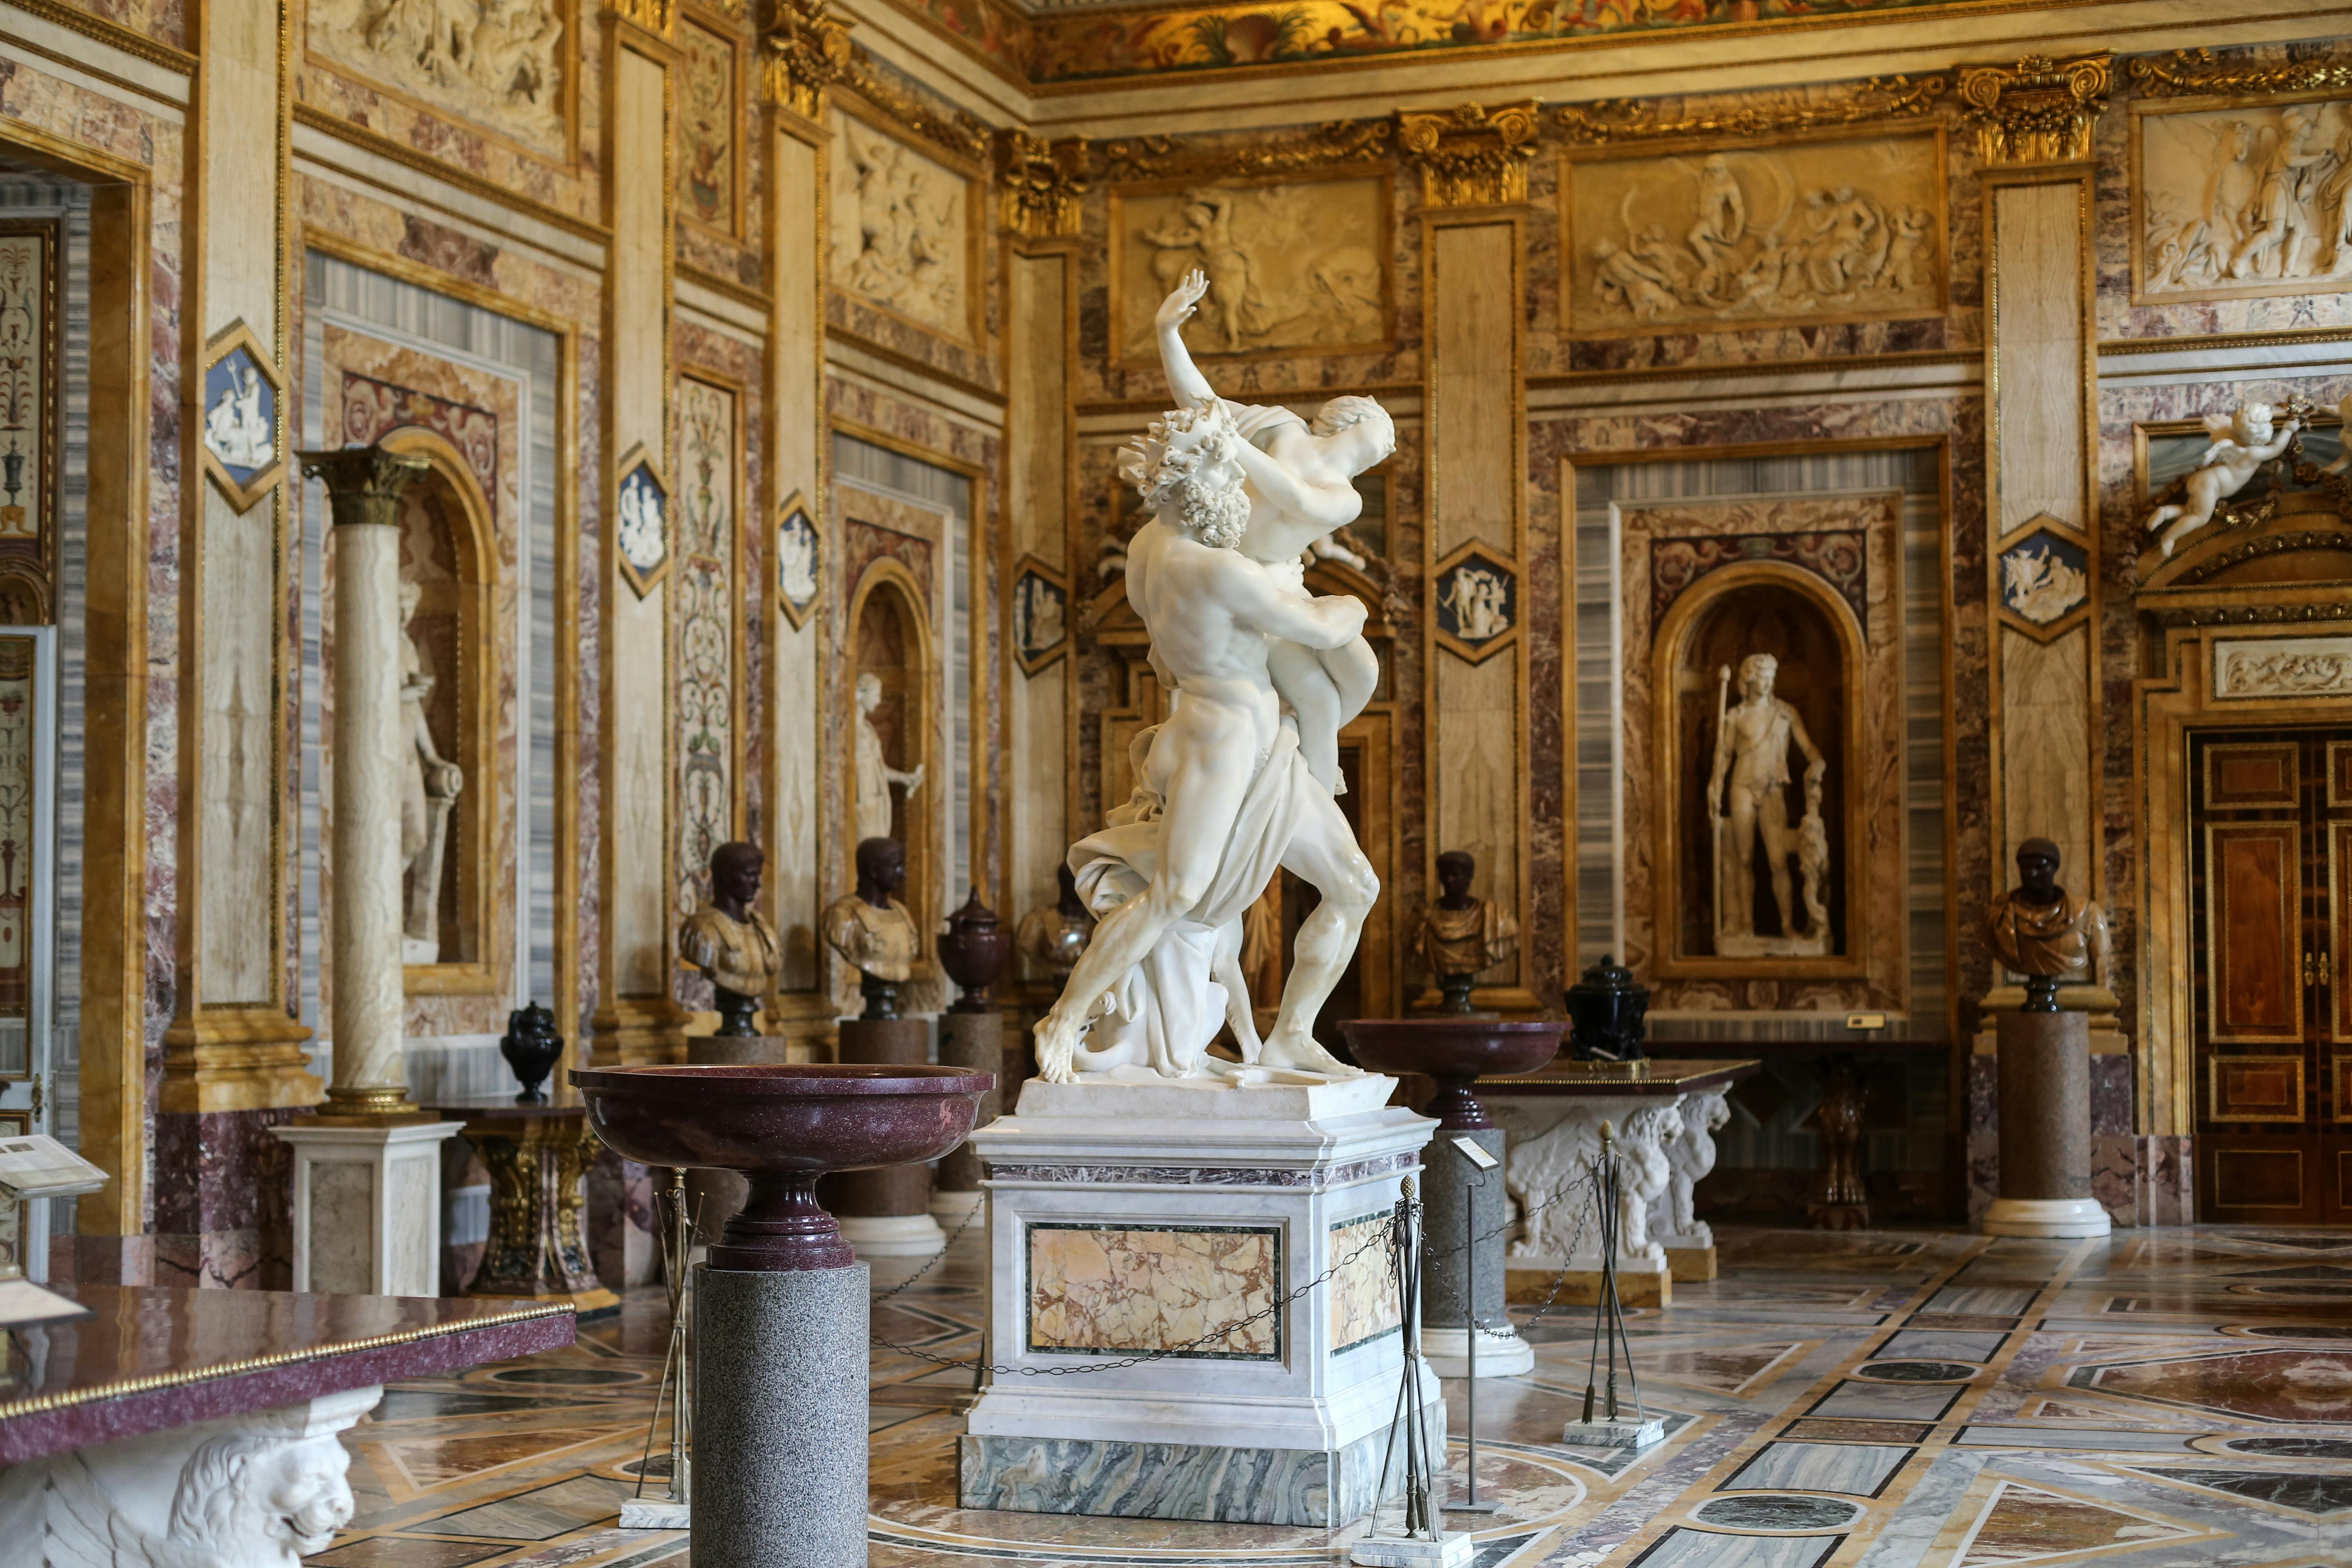 Borghese Gallery: Skip The Line Ticket